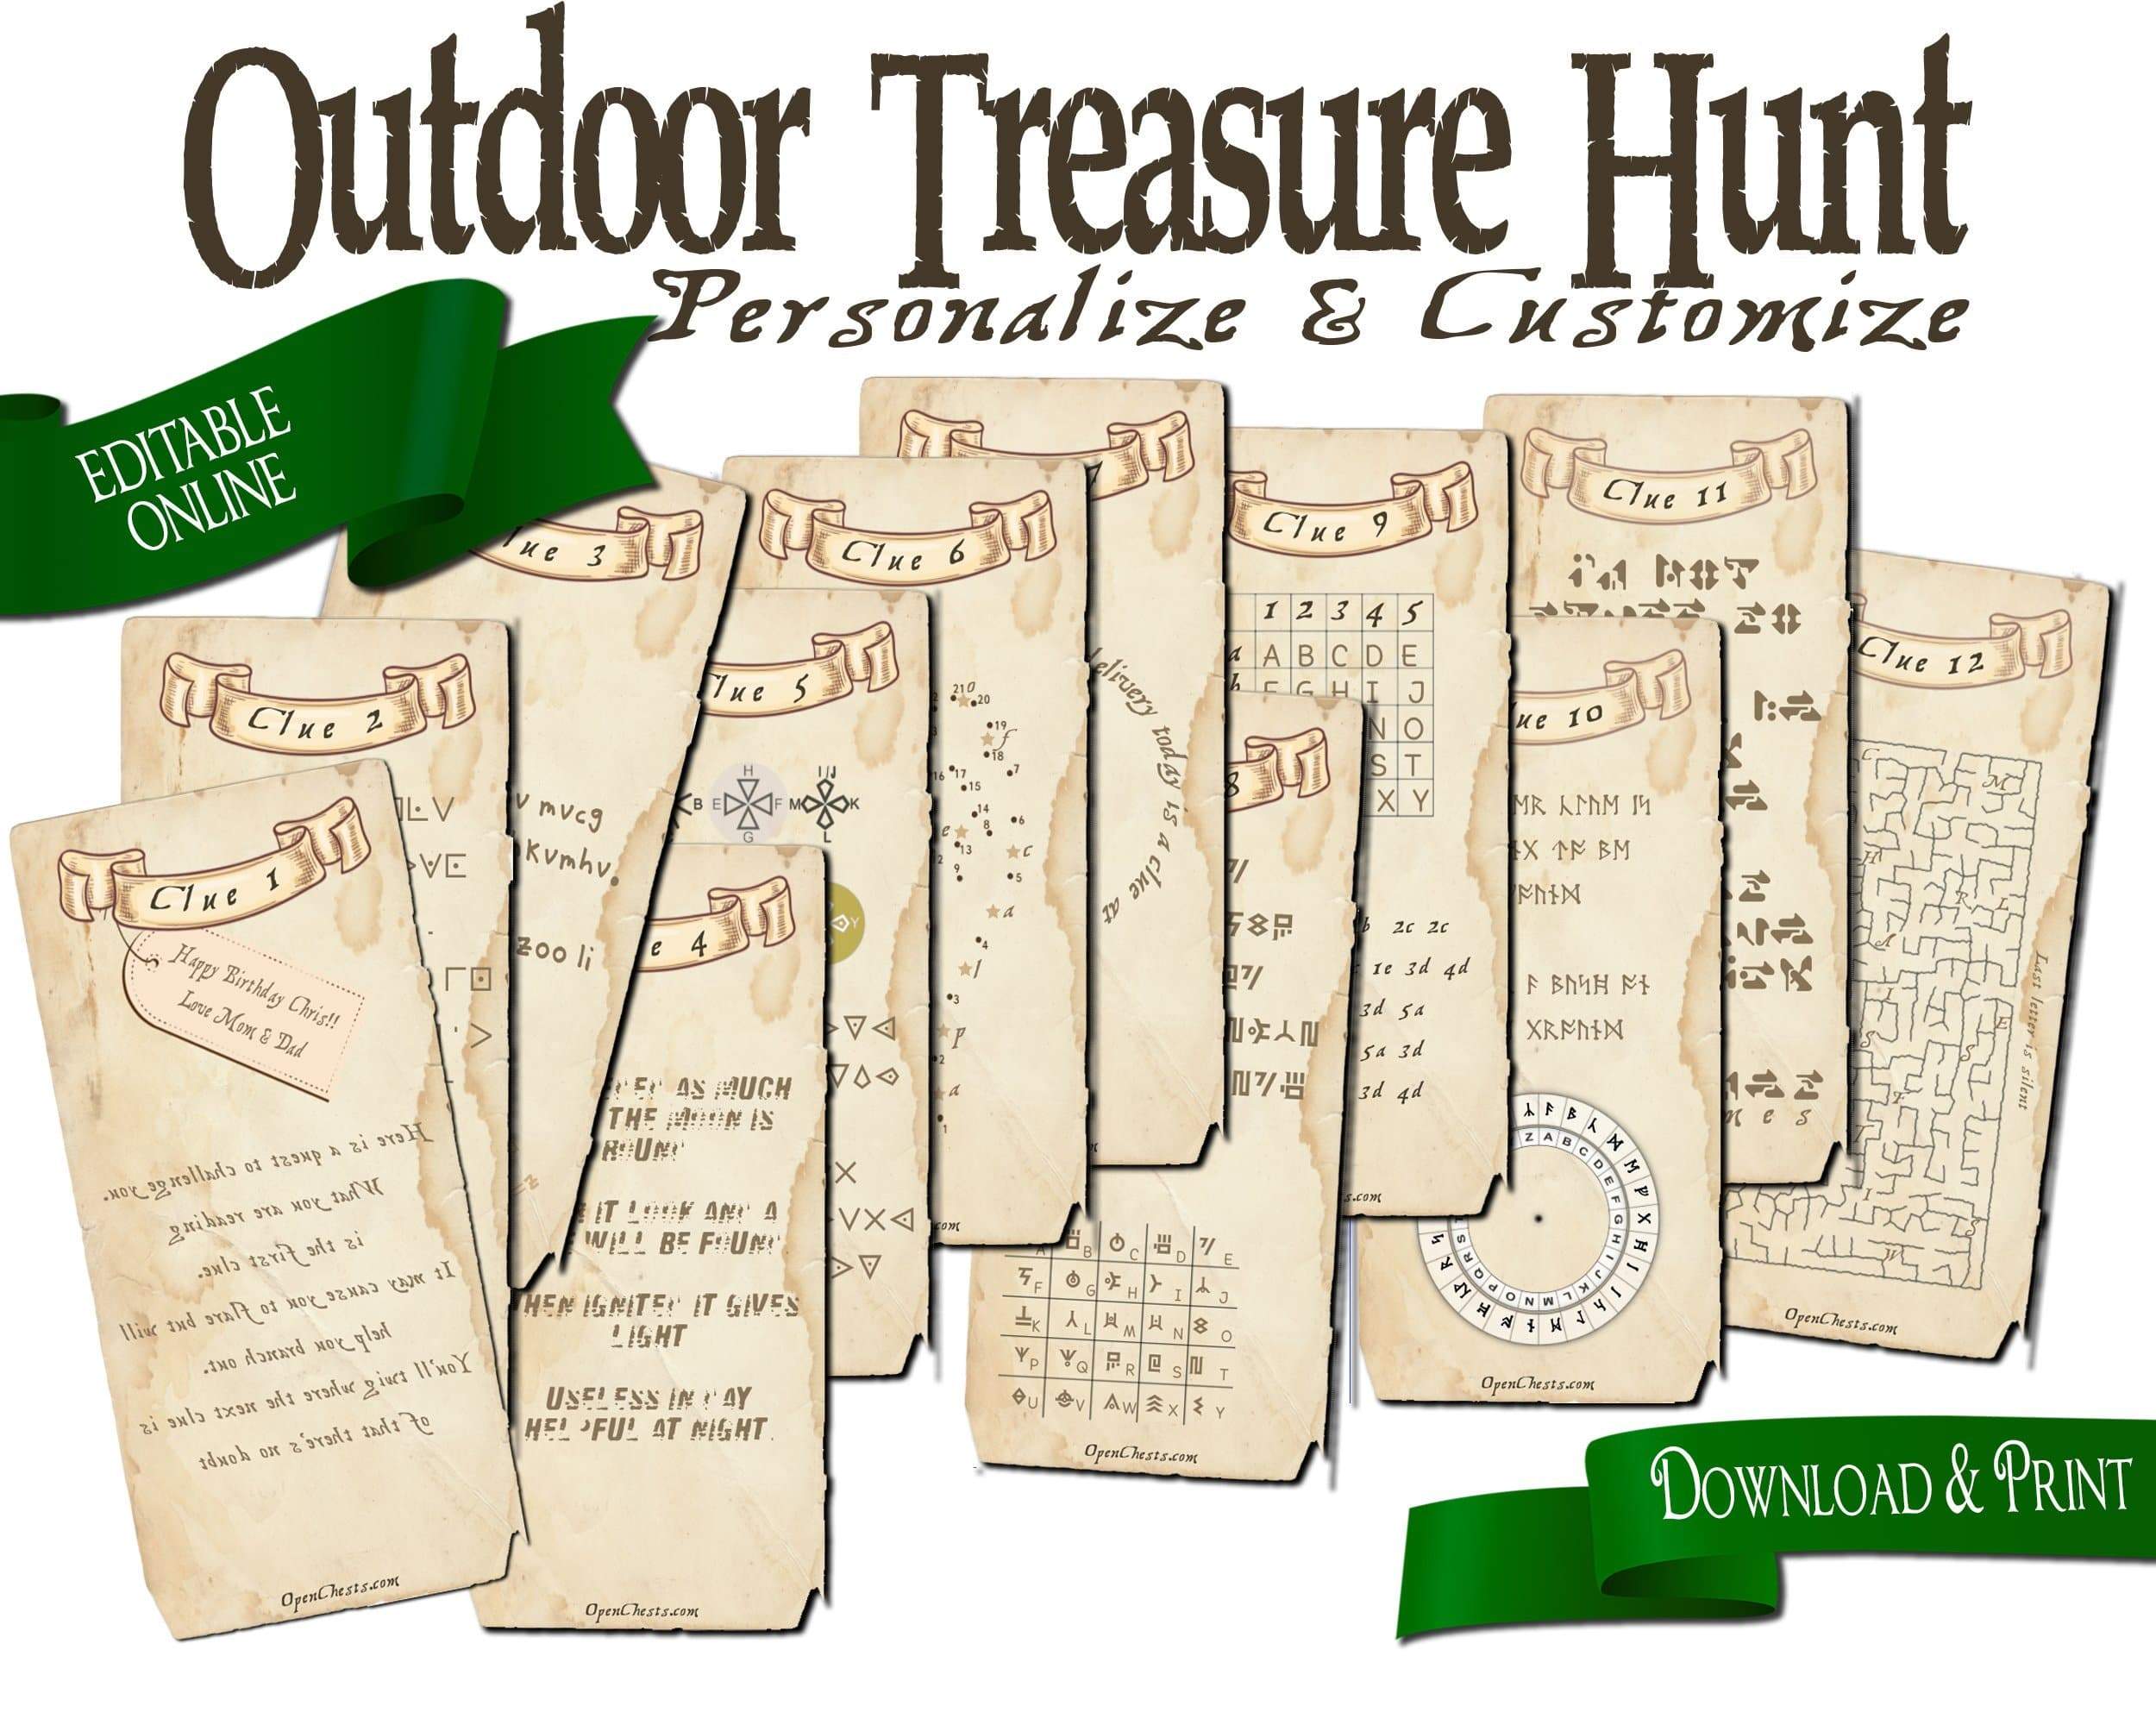 Outdoor Treasure Hunt for Teenagers | Challenging Clues | For Adults too - Open Chests